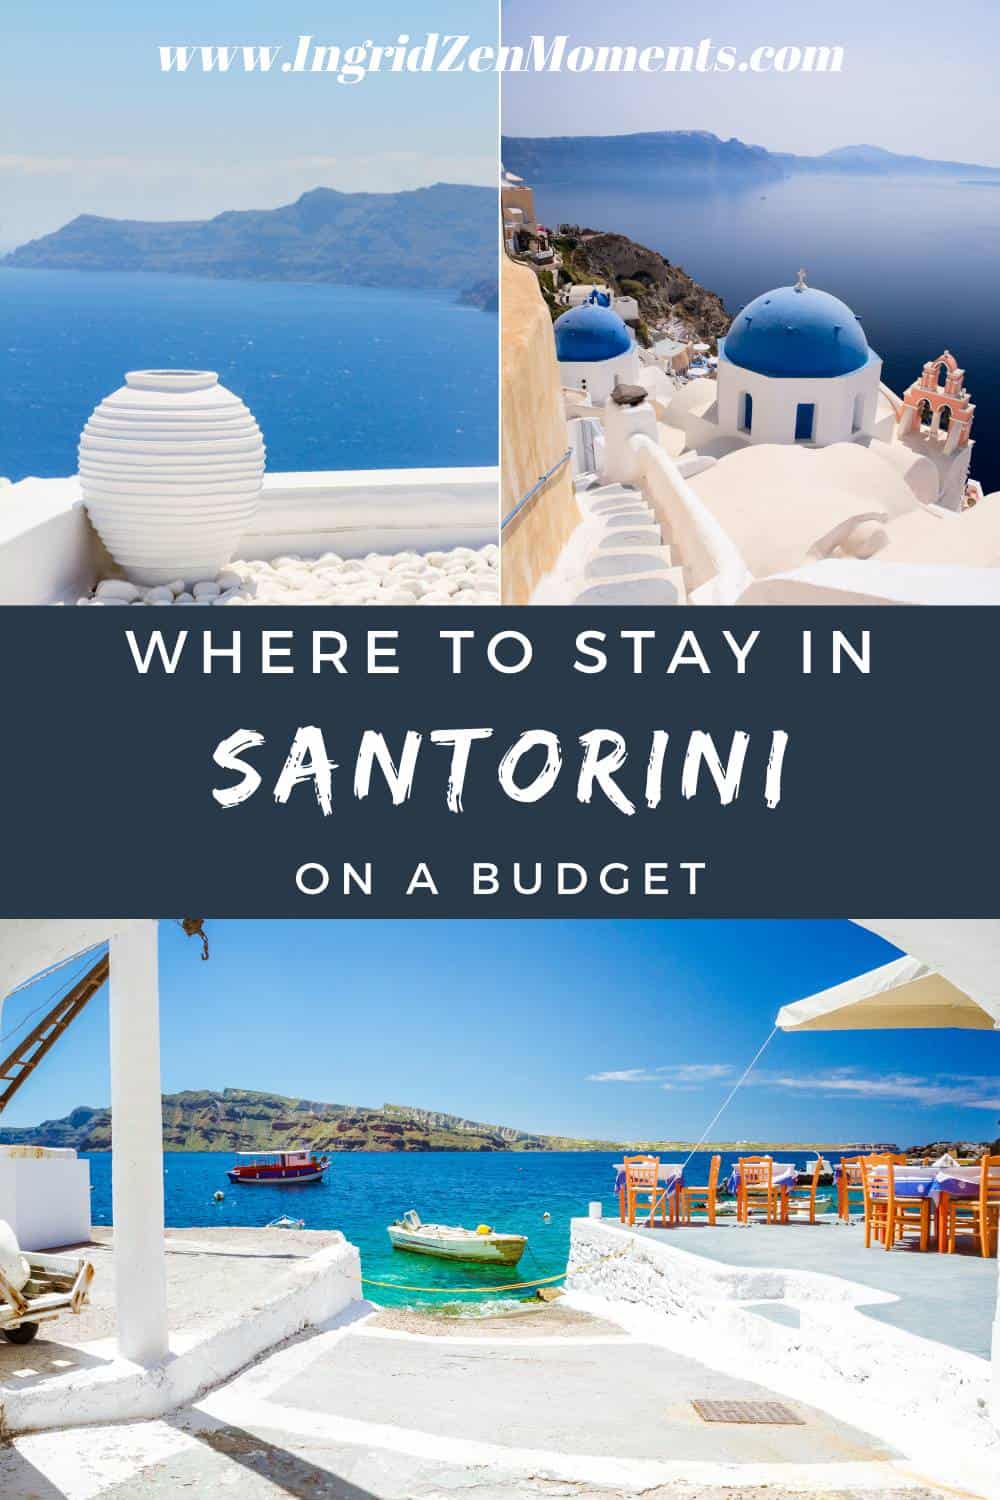 Where to stay in Santorini on a budget